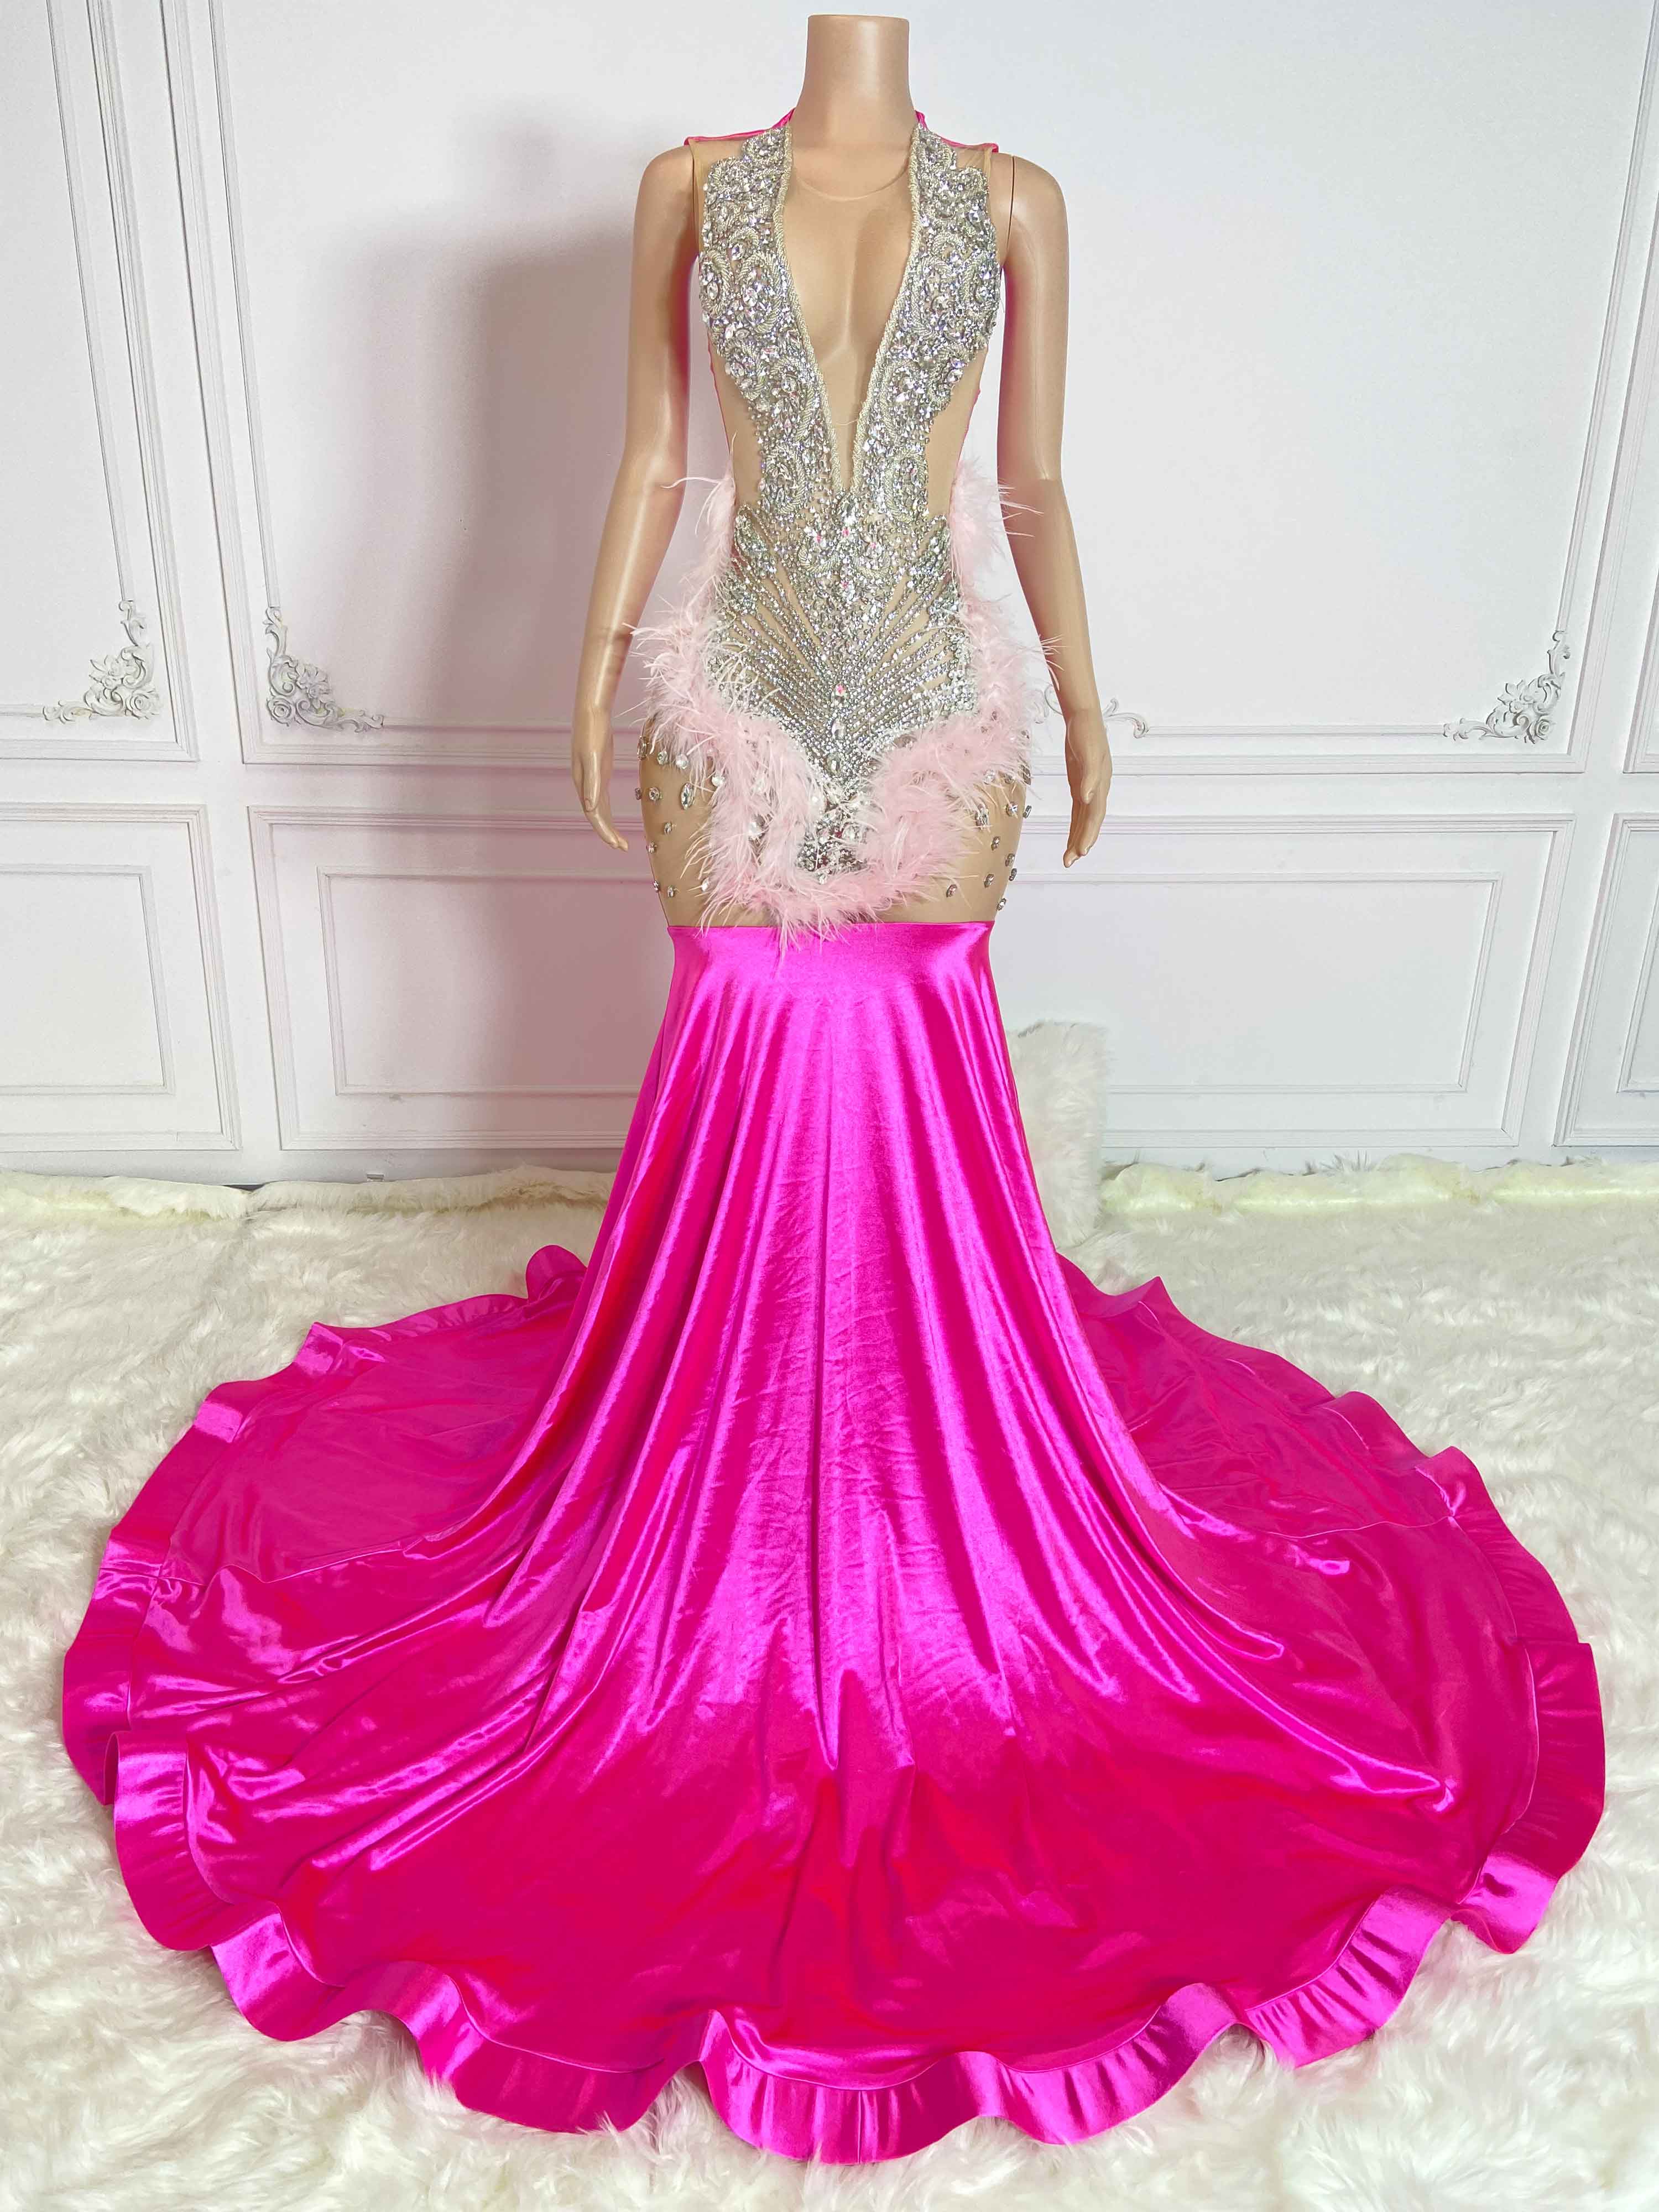 Rosy Low Cut and Rhinestone Sleeveless Maxi Gown